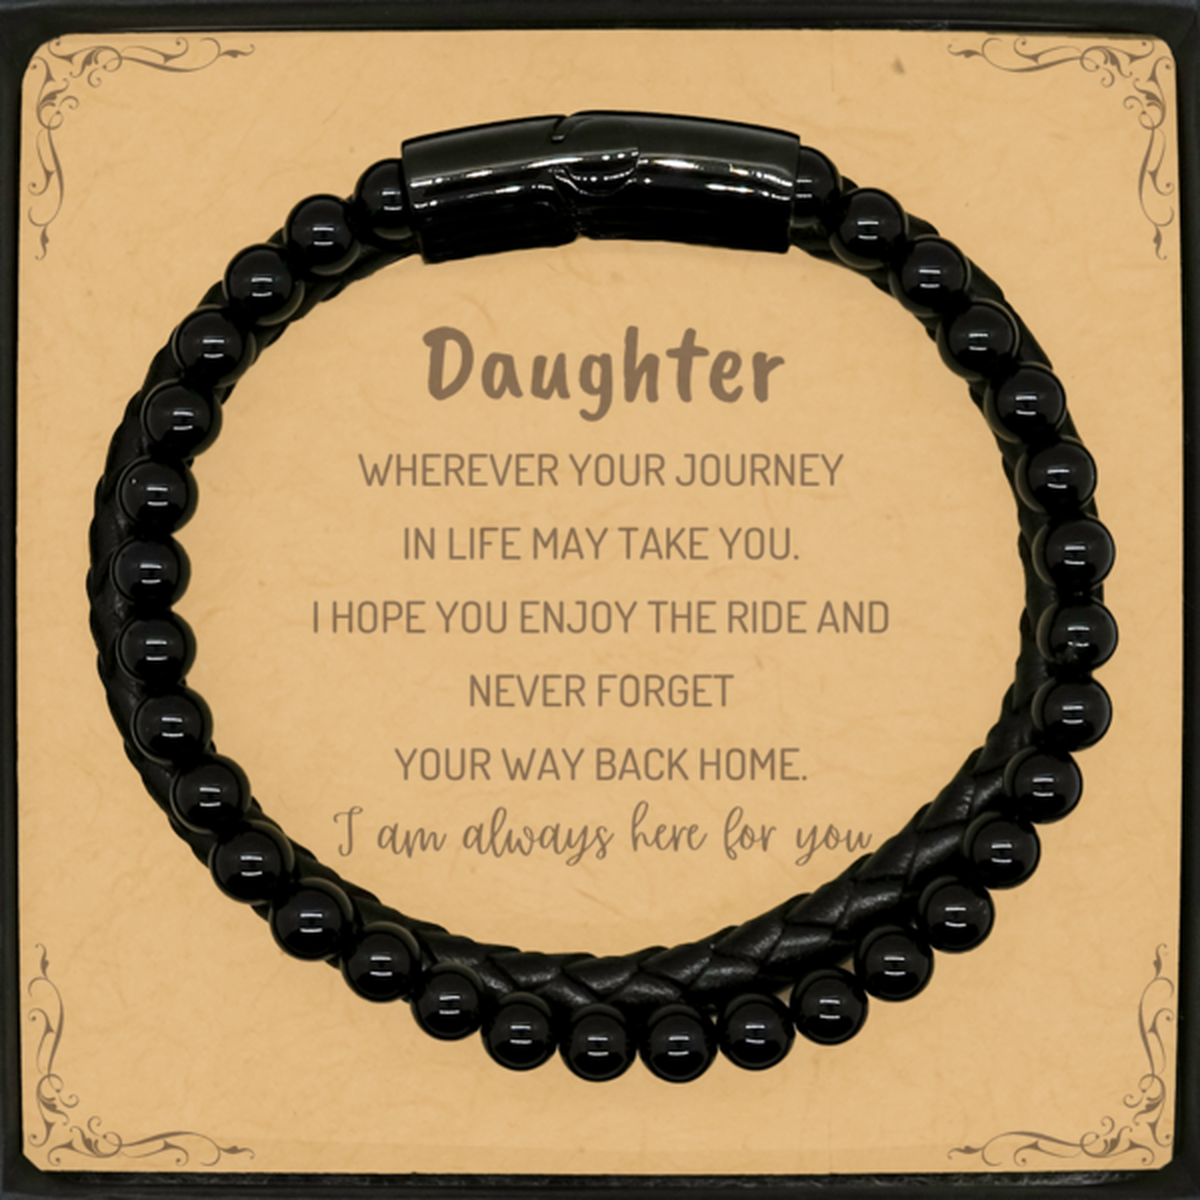 Daughter wherever your journey in life may take you, I am always here for you Daughter Stone Leather Bracelets, Awesome Christmas Gifts For Daughter Message Card, Daughter Birthday Gifts for Men Women Family Loved One